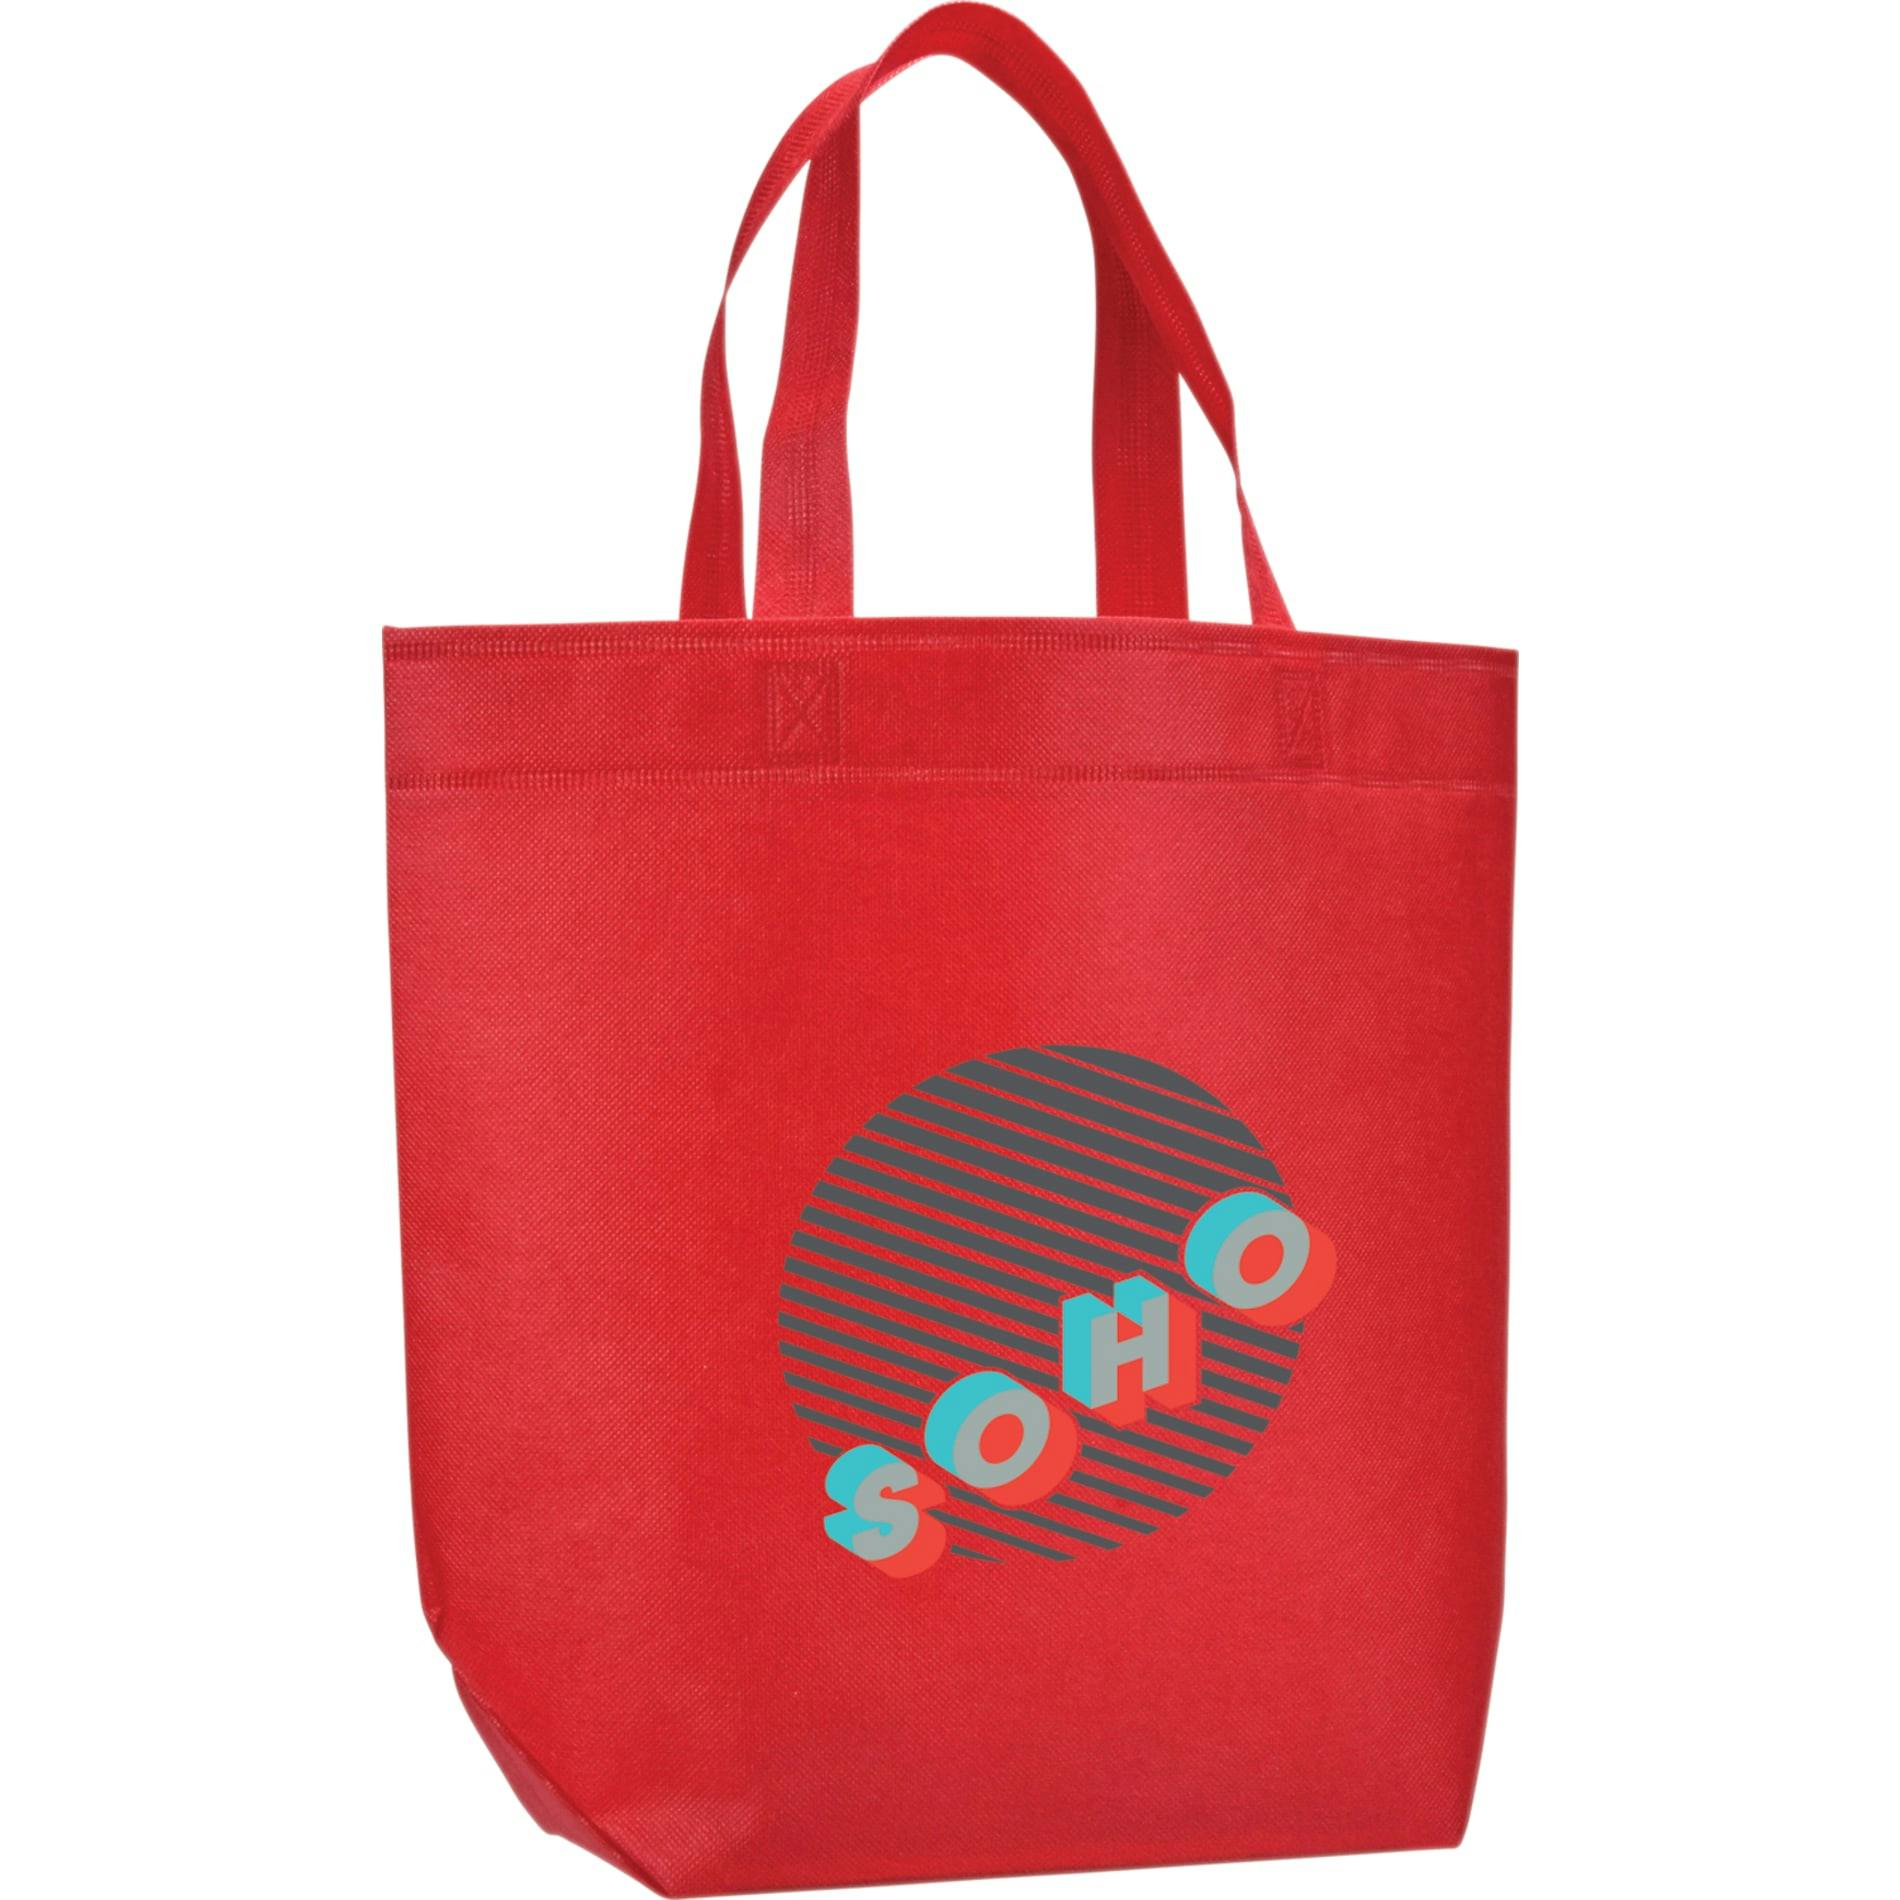 Challenger Non-Woven Shopper Tote - additional Image 1